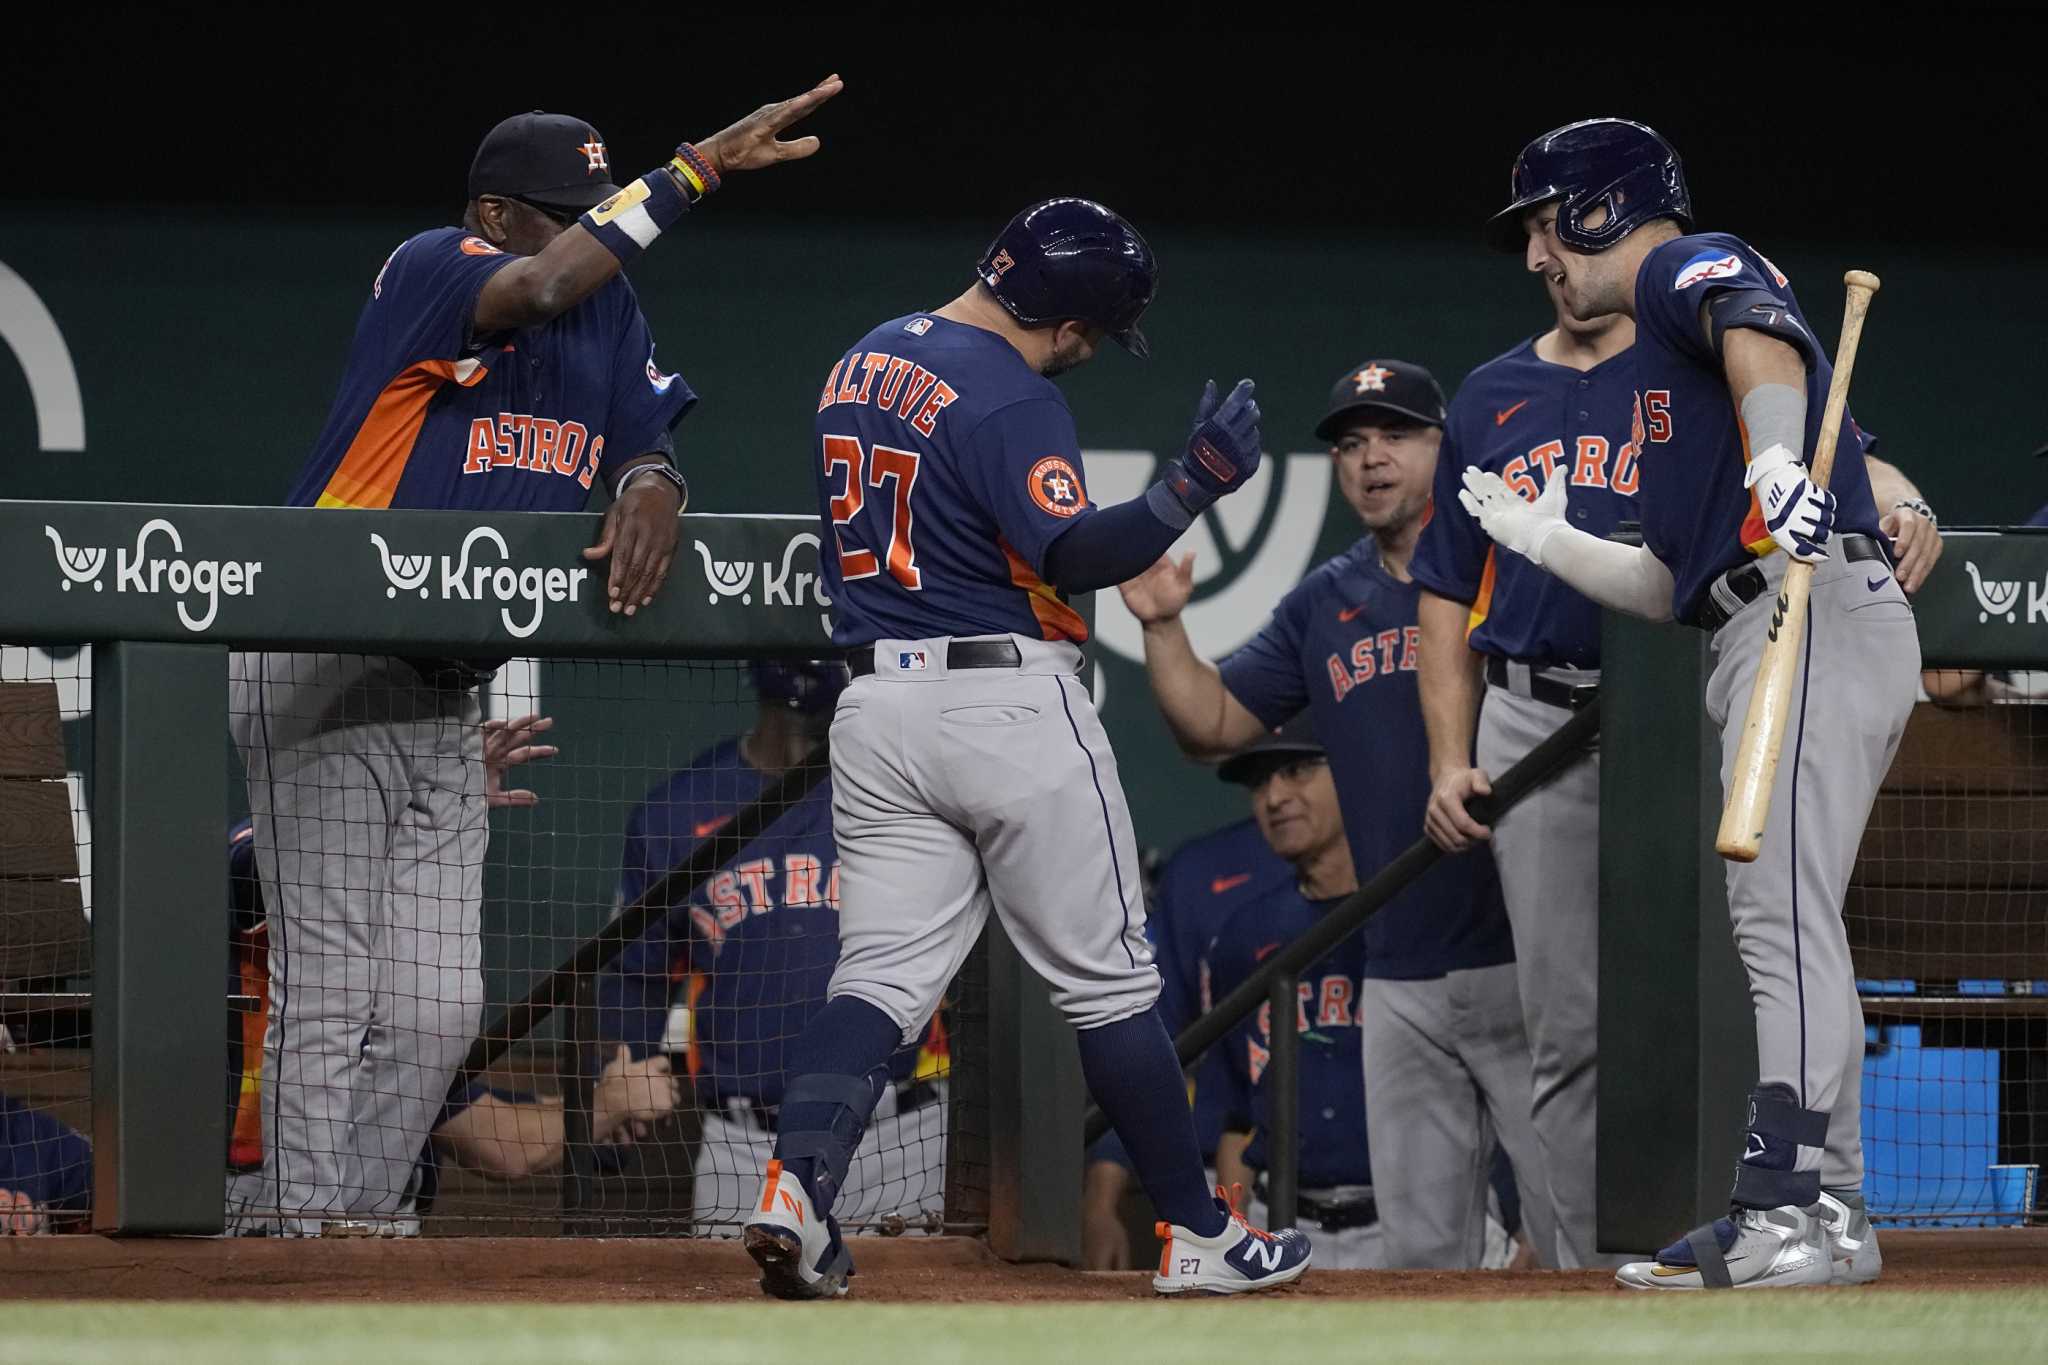 Houston Astros: Team's stark home-road splits in 2023 are puzzling